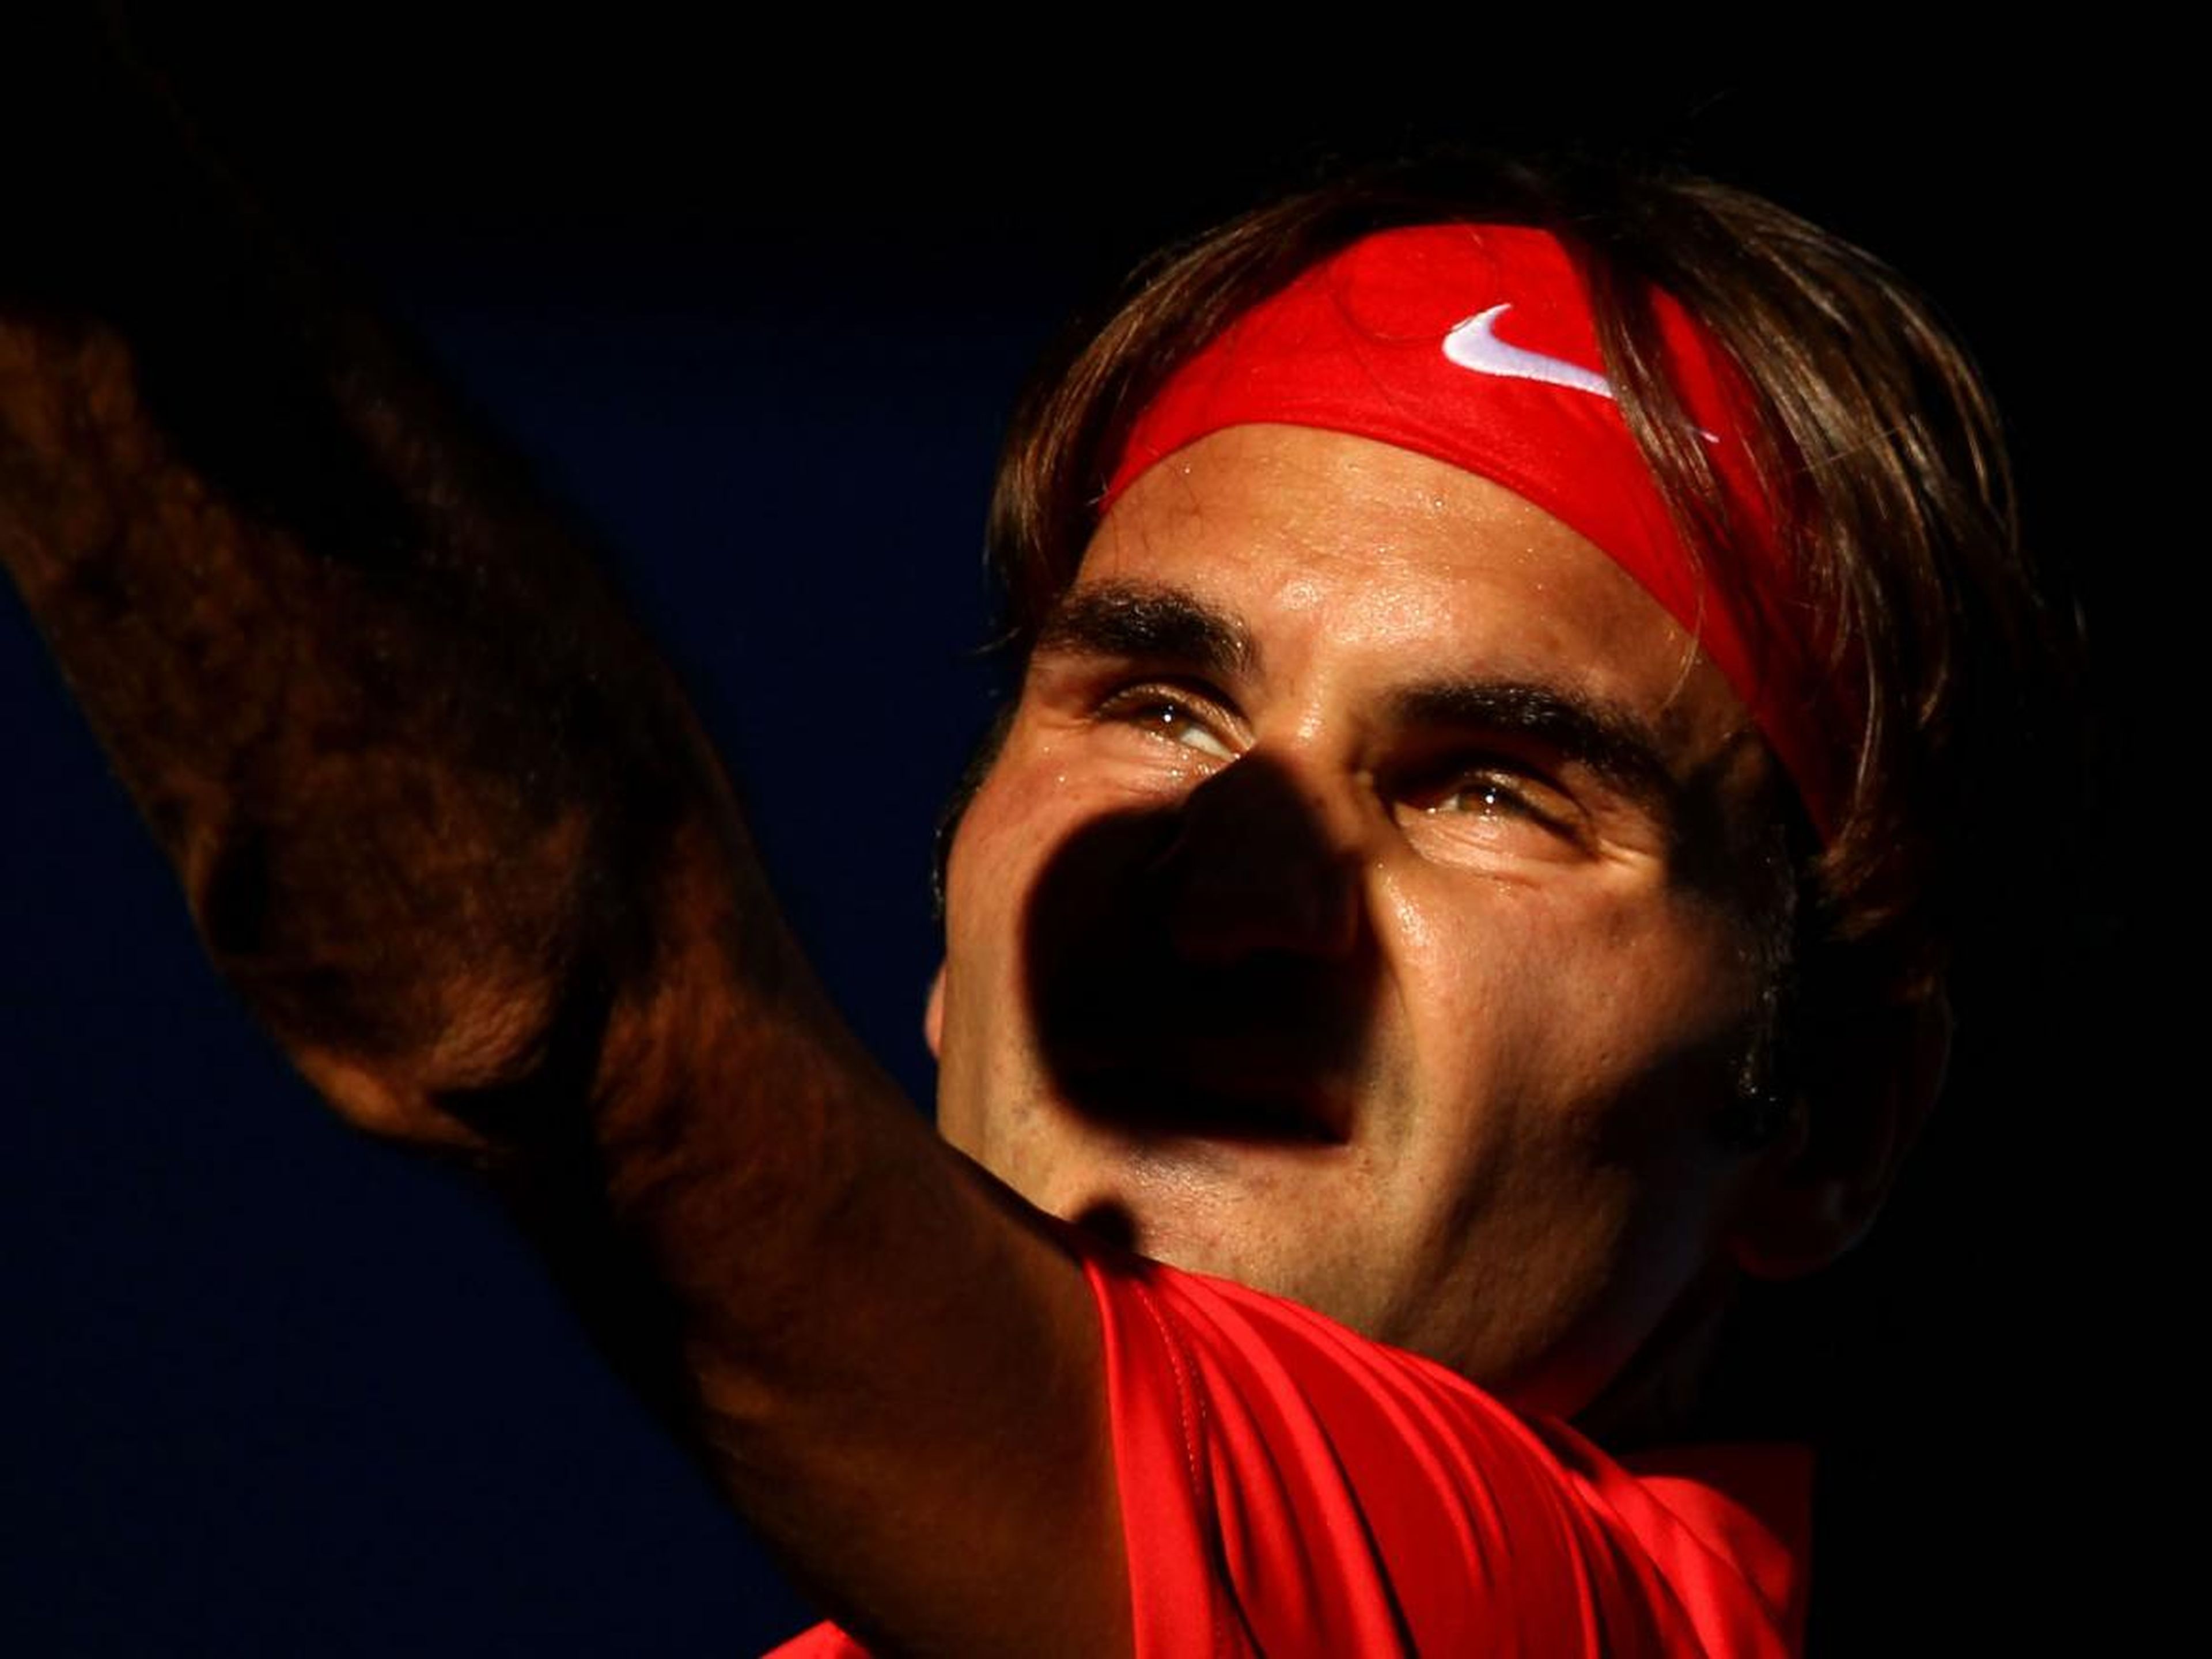 Federer still manager to serve into the sun.